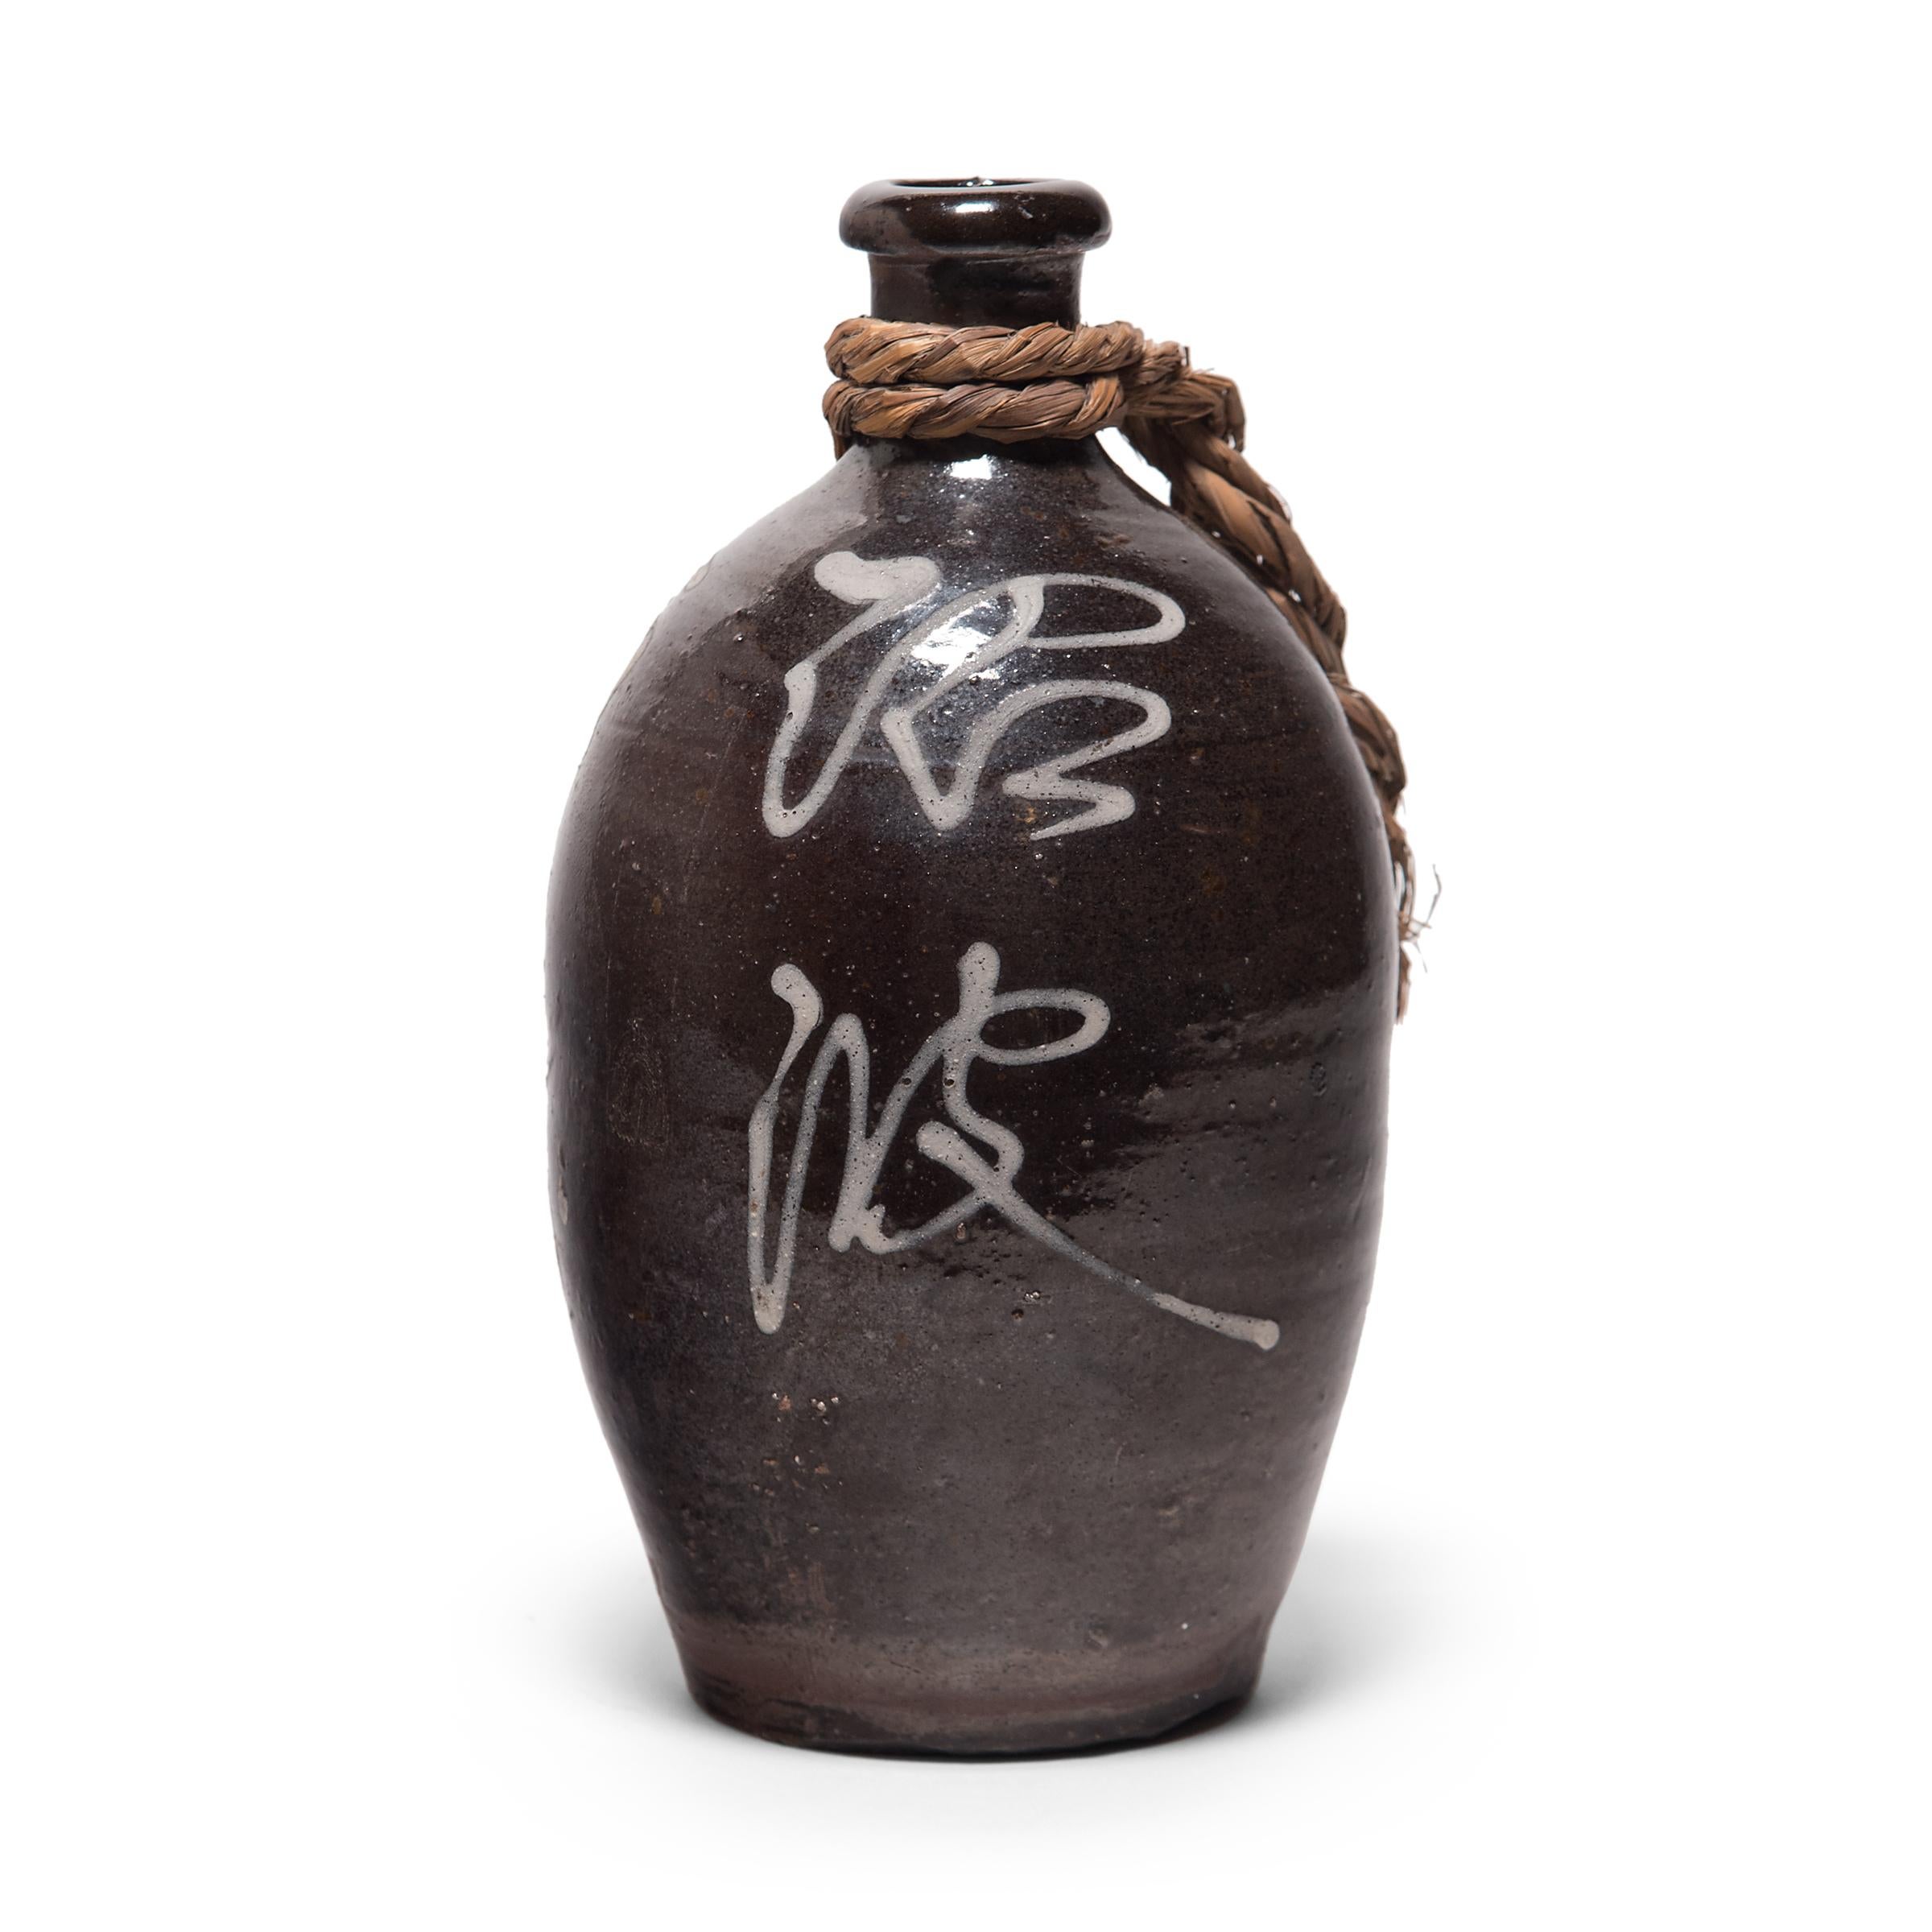 This glazed ceramic jar is a Japanese sake bottle from the late-Meiji era. The jar has a rounded bottleneck form and is coated with a dark brown glaze in resemblance to bizen ware pottery. Applied in a contrasting light glaze, expressive calligraphy